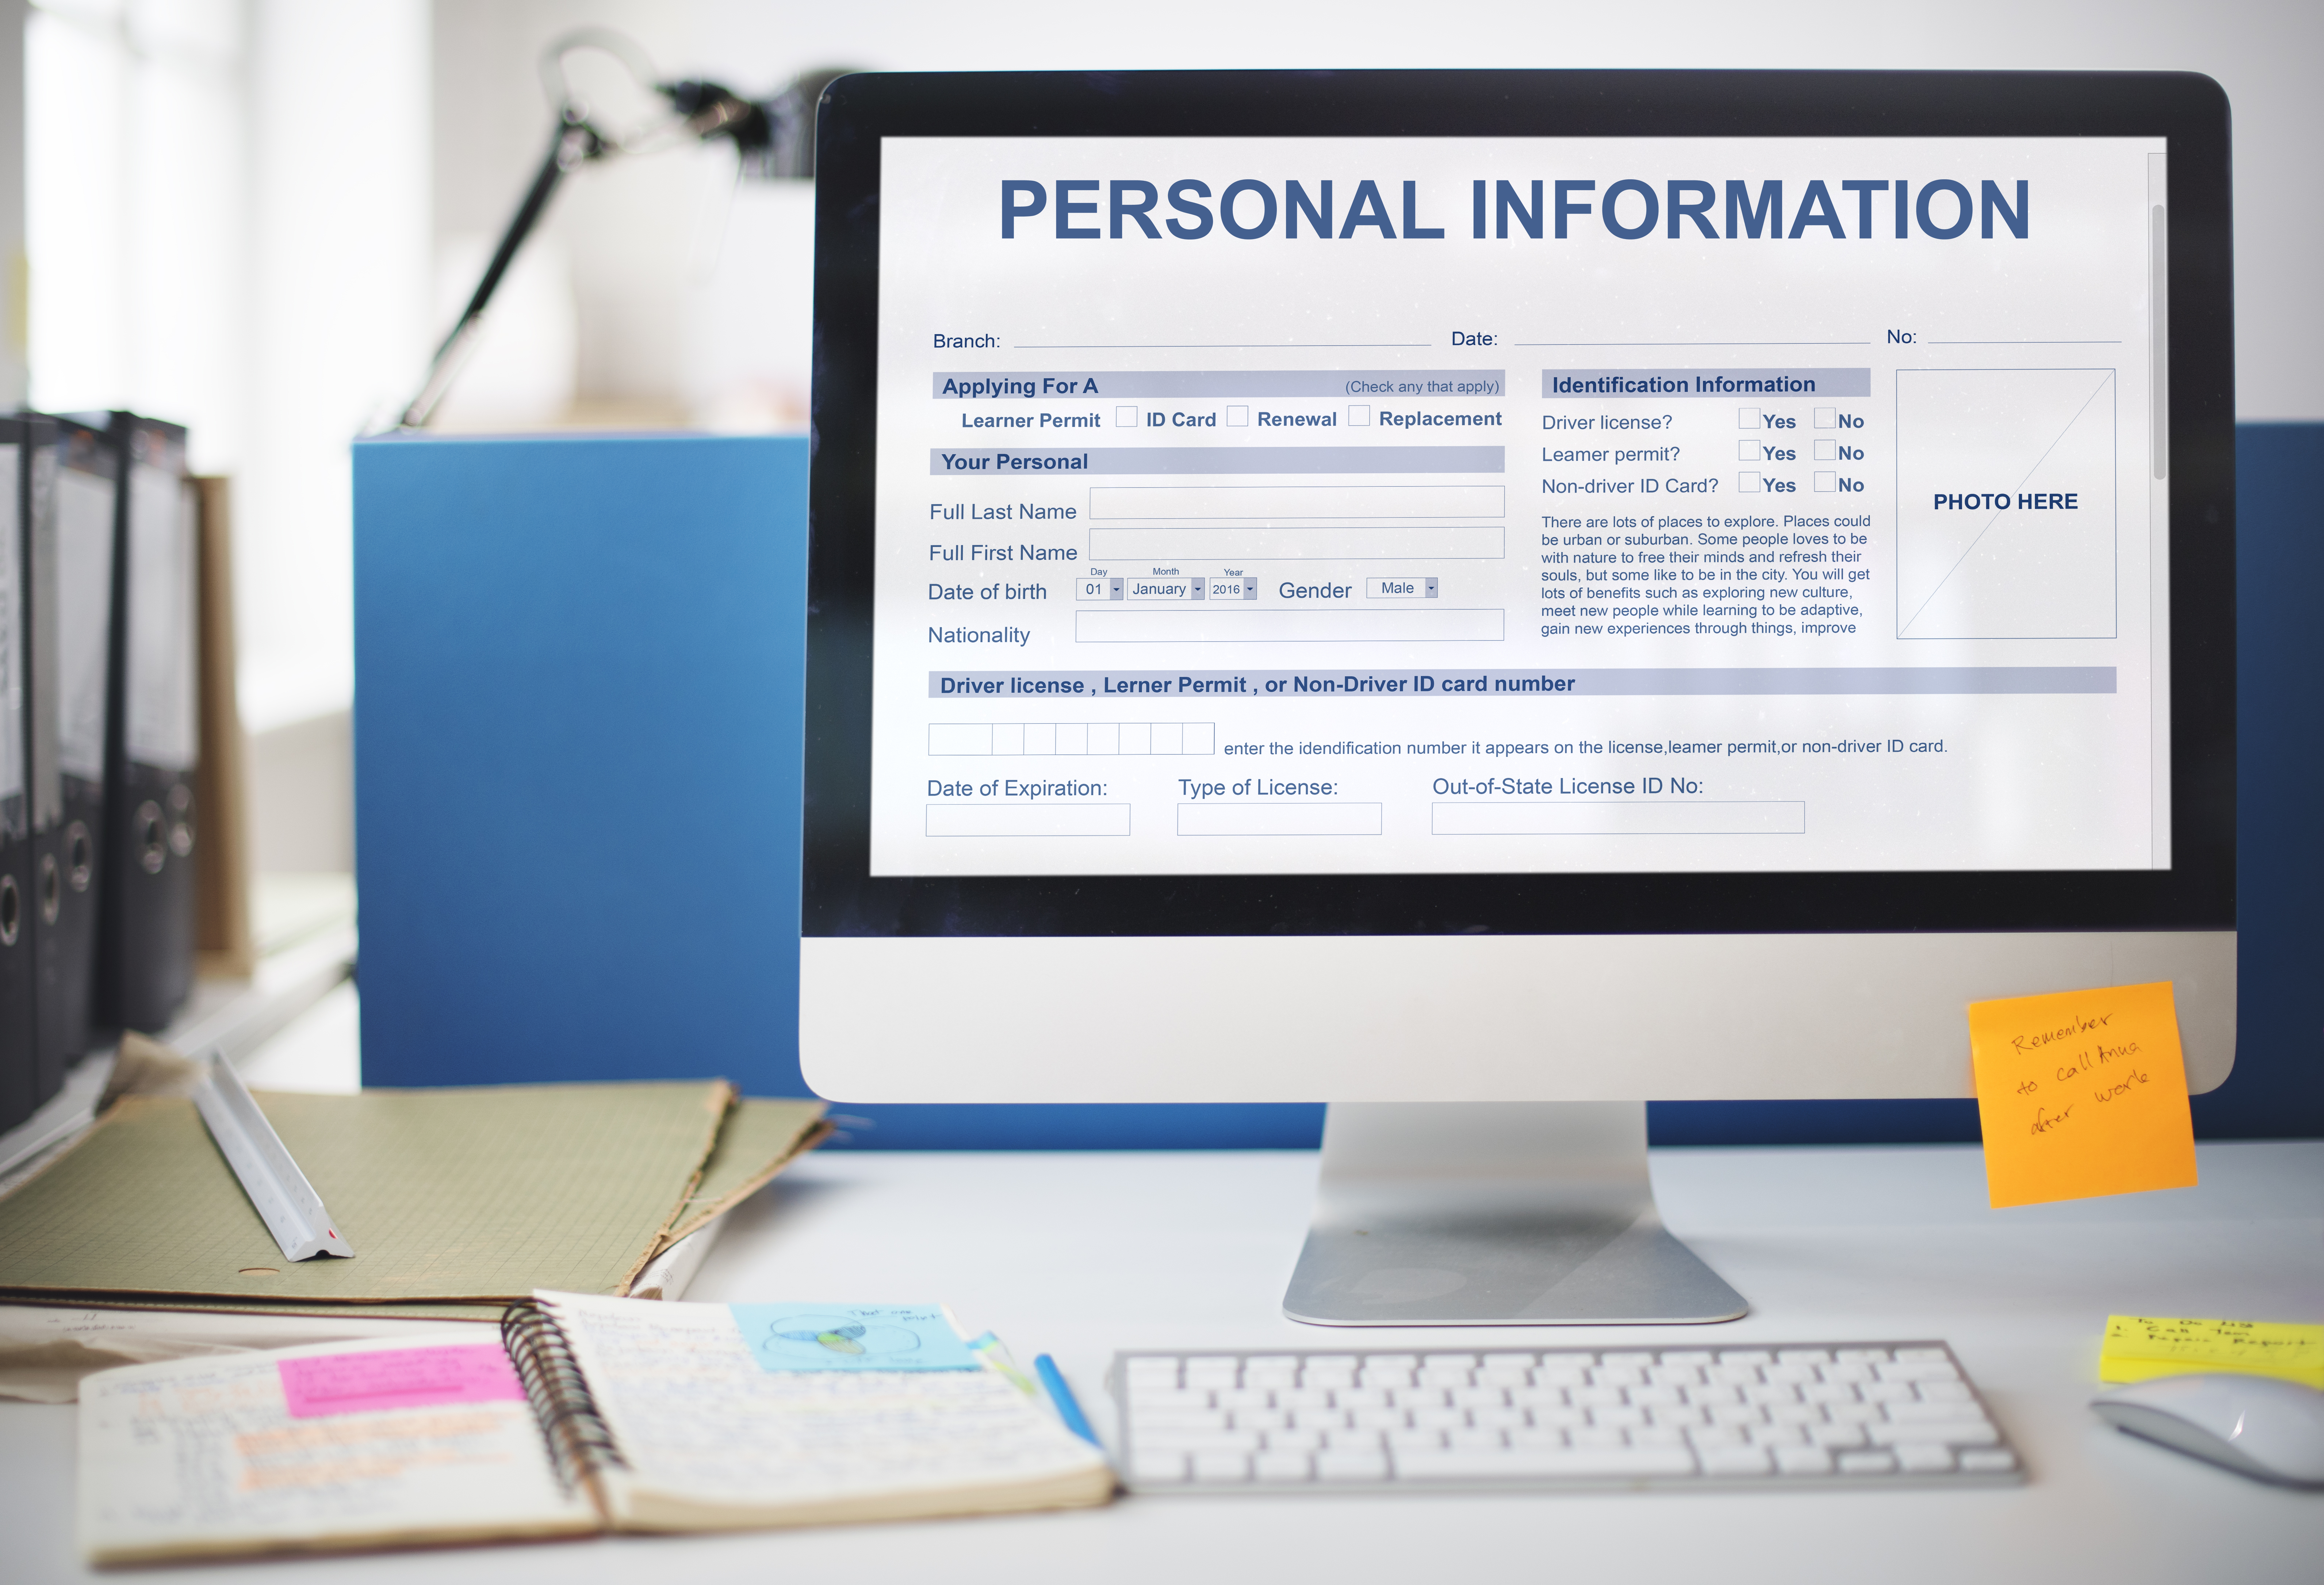 Why do we need your personal details?